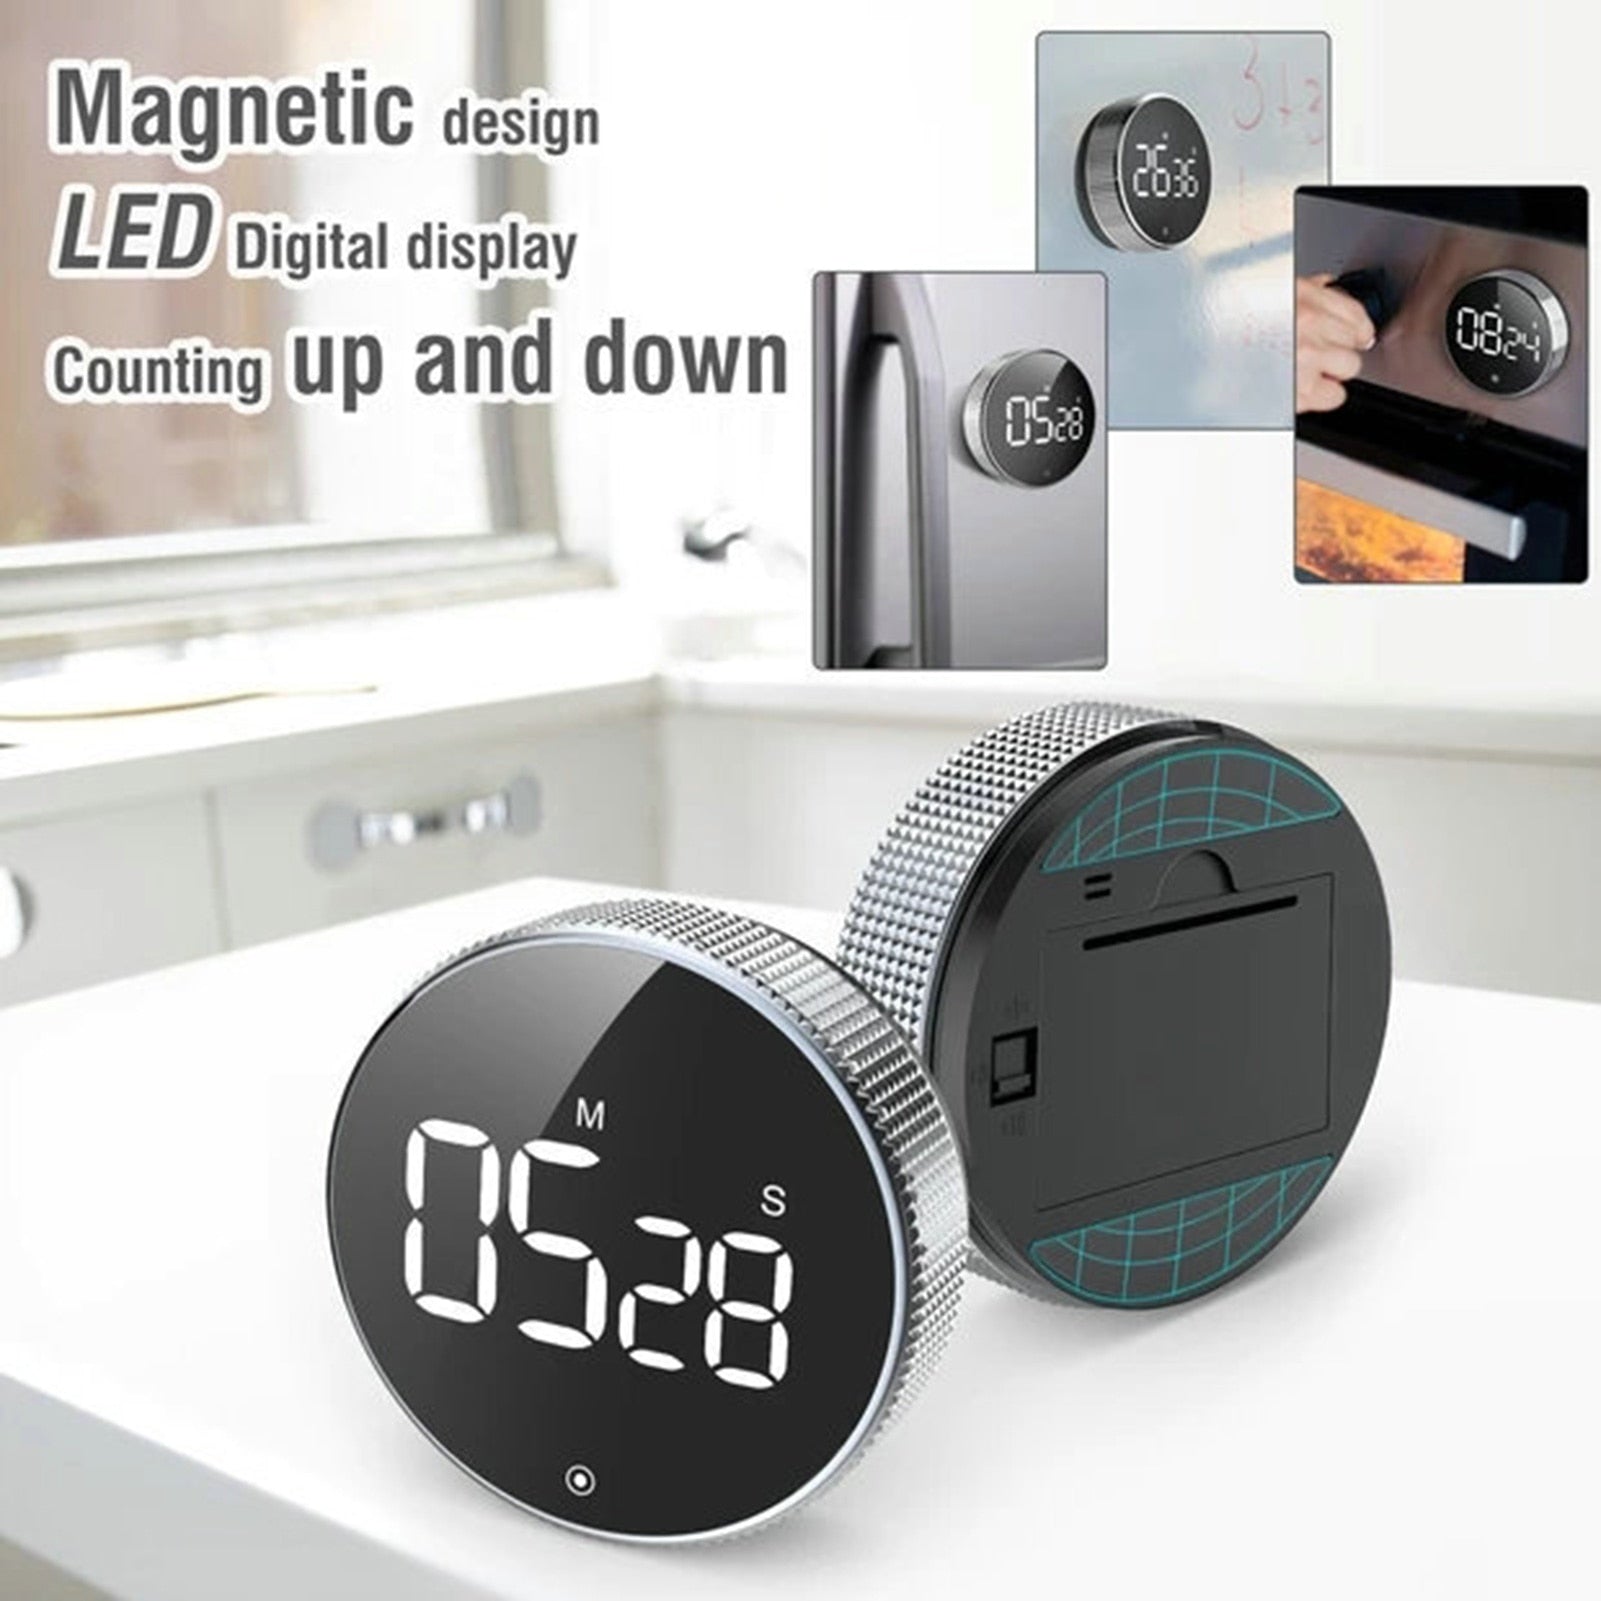 Baseus Magnetic Digital Timer possesses magnetic design, LED digital display, counting of both up and down.